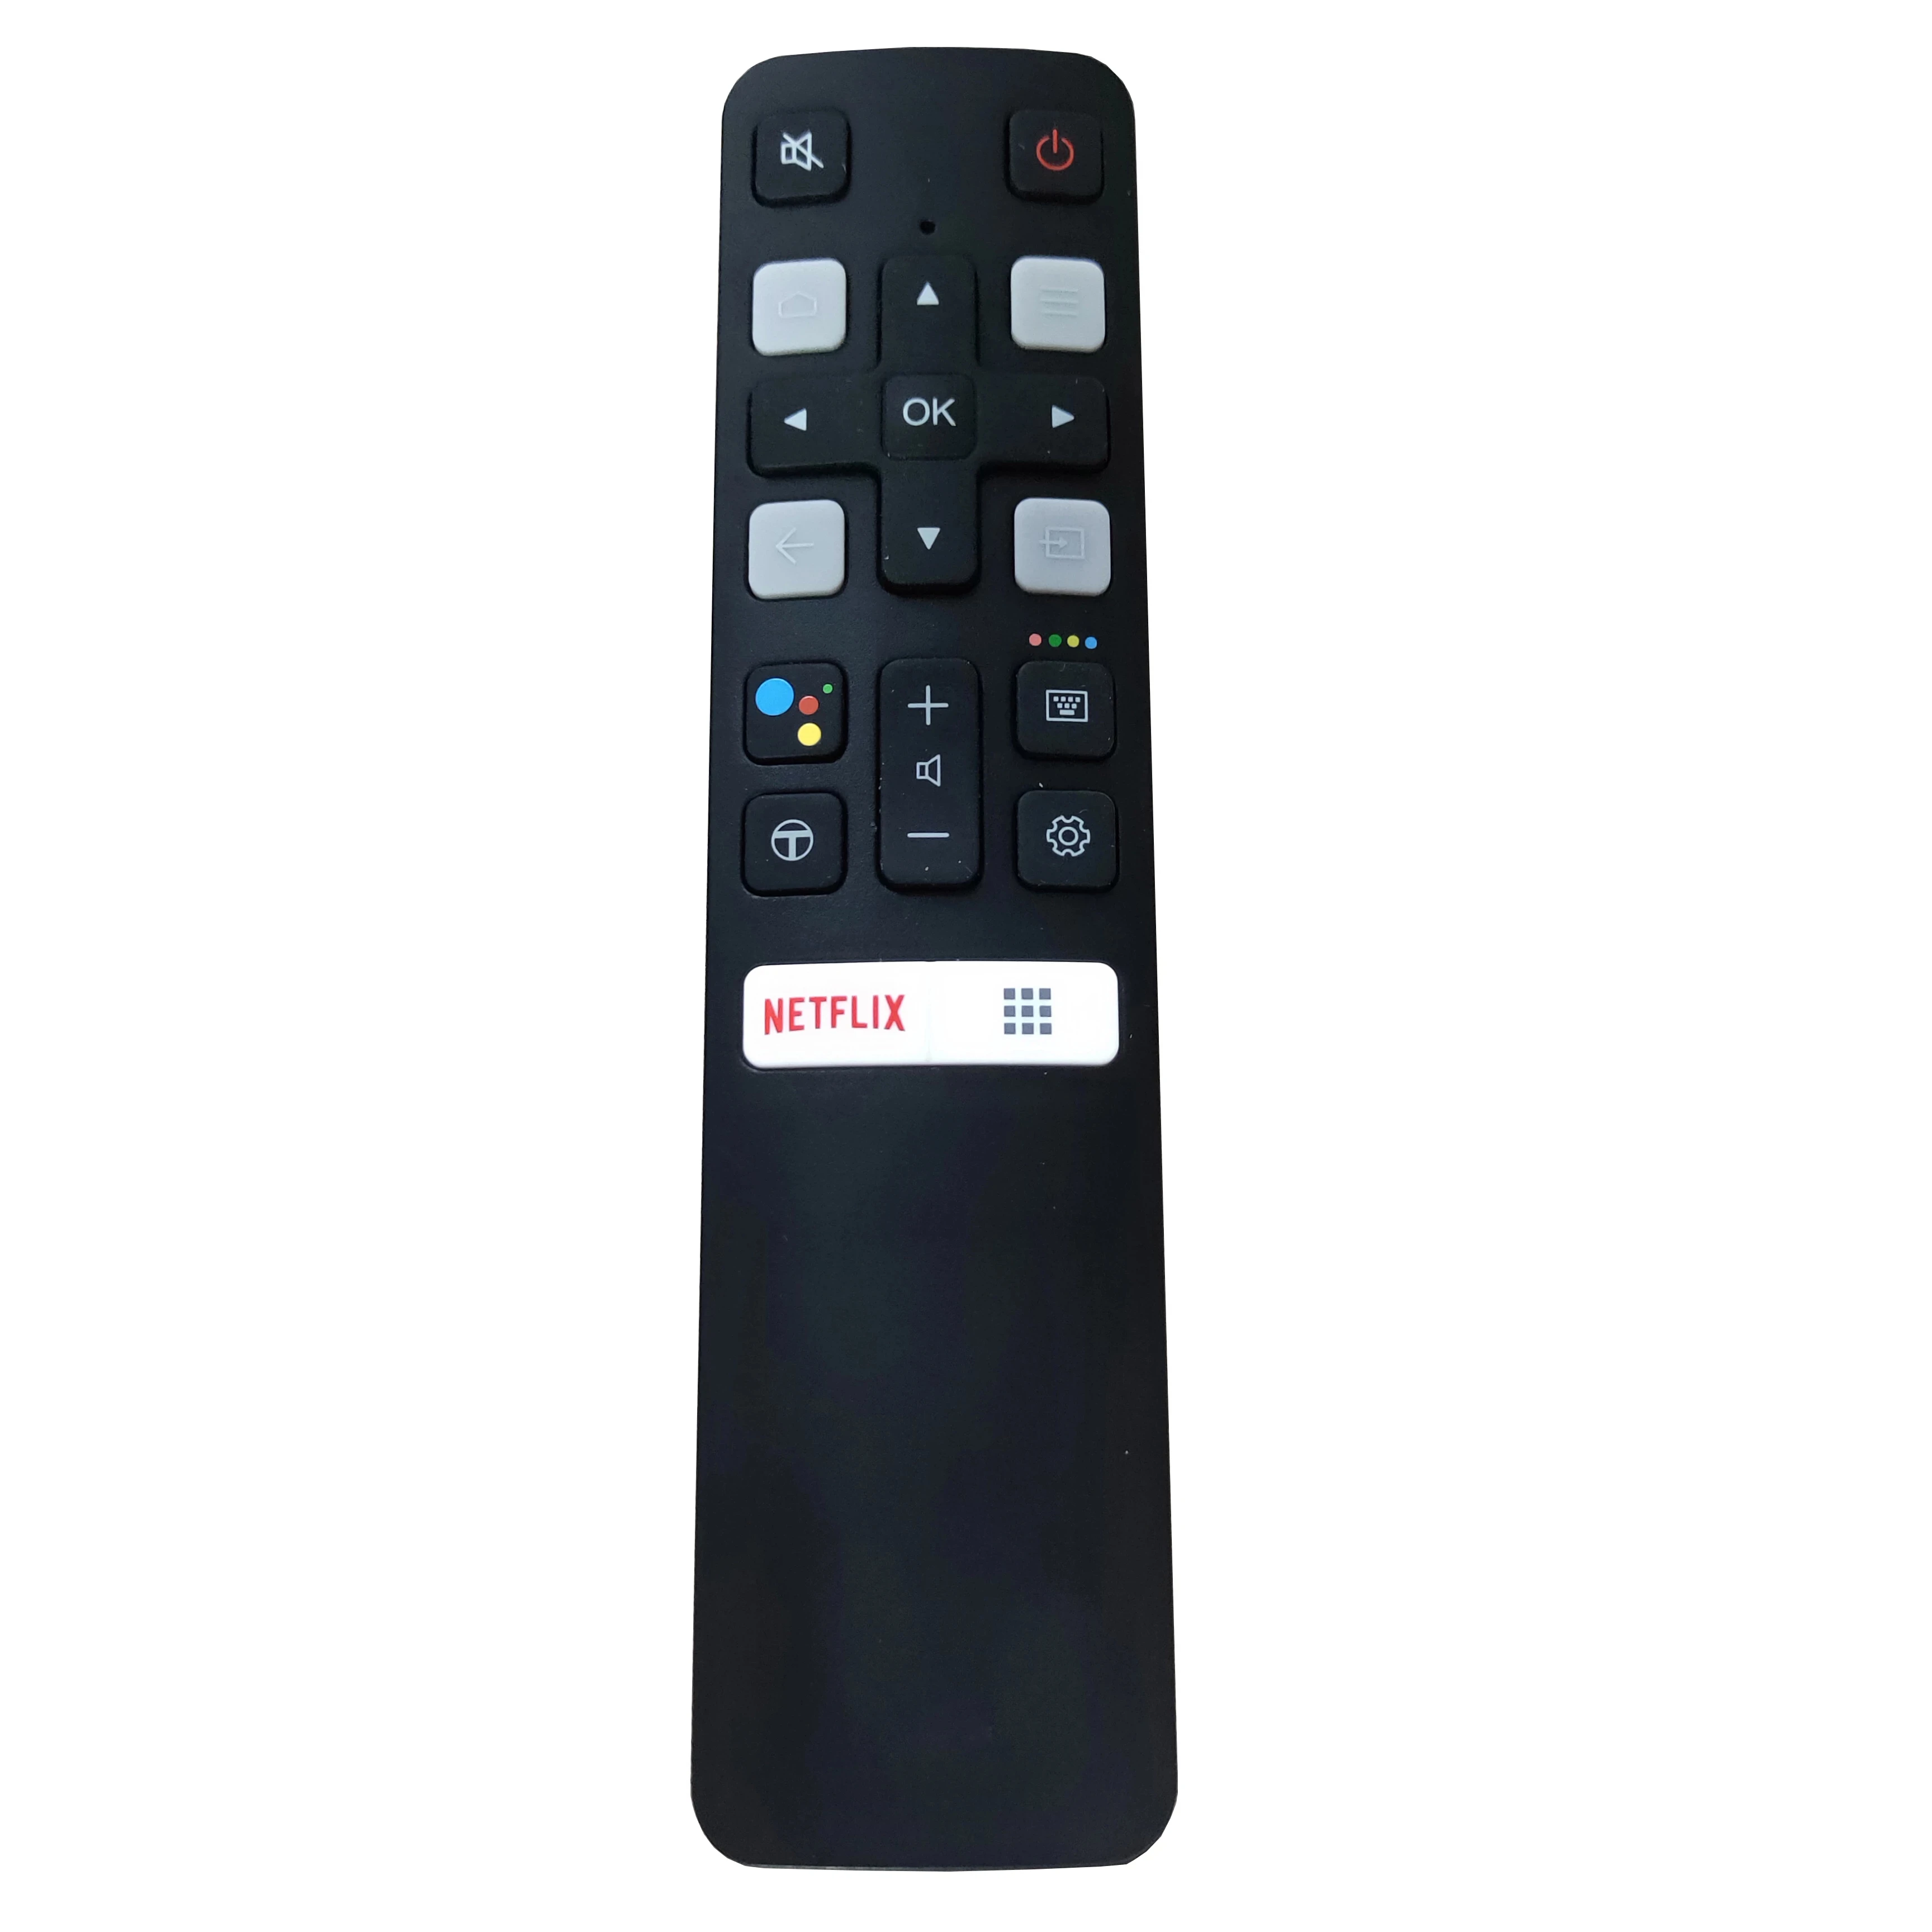 

New Original Remote Control For TCL LCD TV RC802V FMR1 50/65EP640 65p815 55P715 50P615 55C815 65P8S 55P8S 55EP680 50P8S 49S6800F, Black